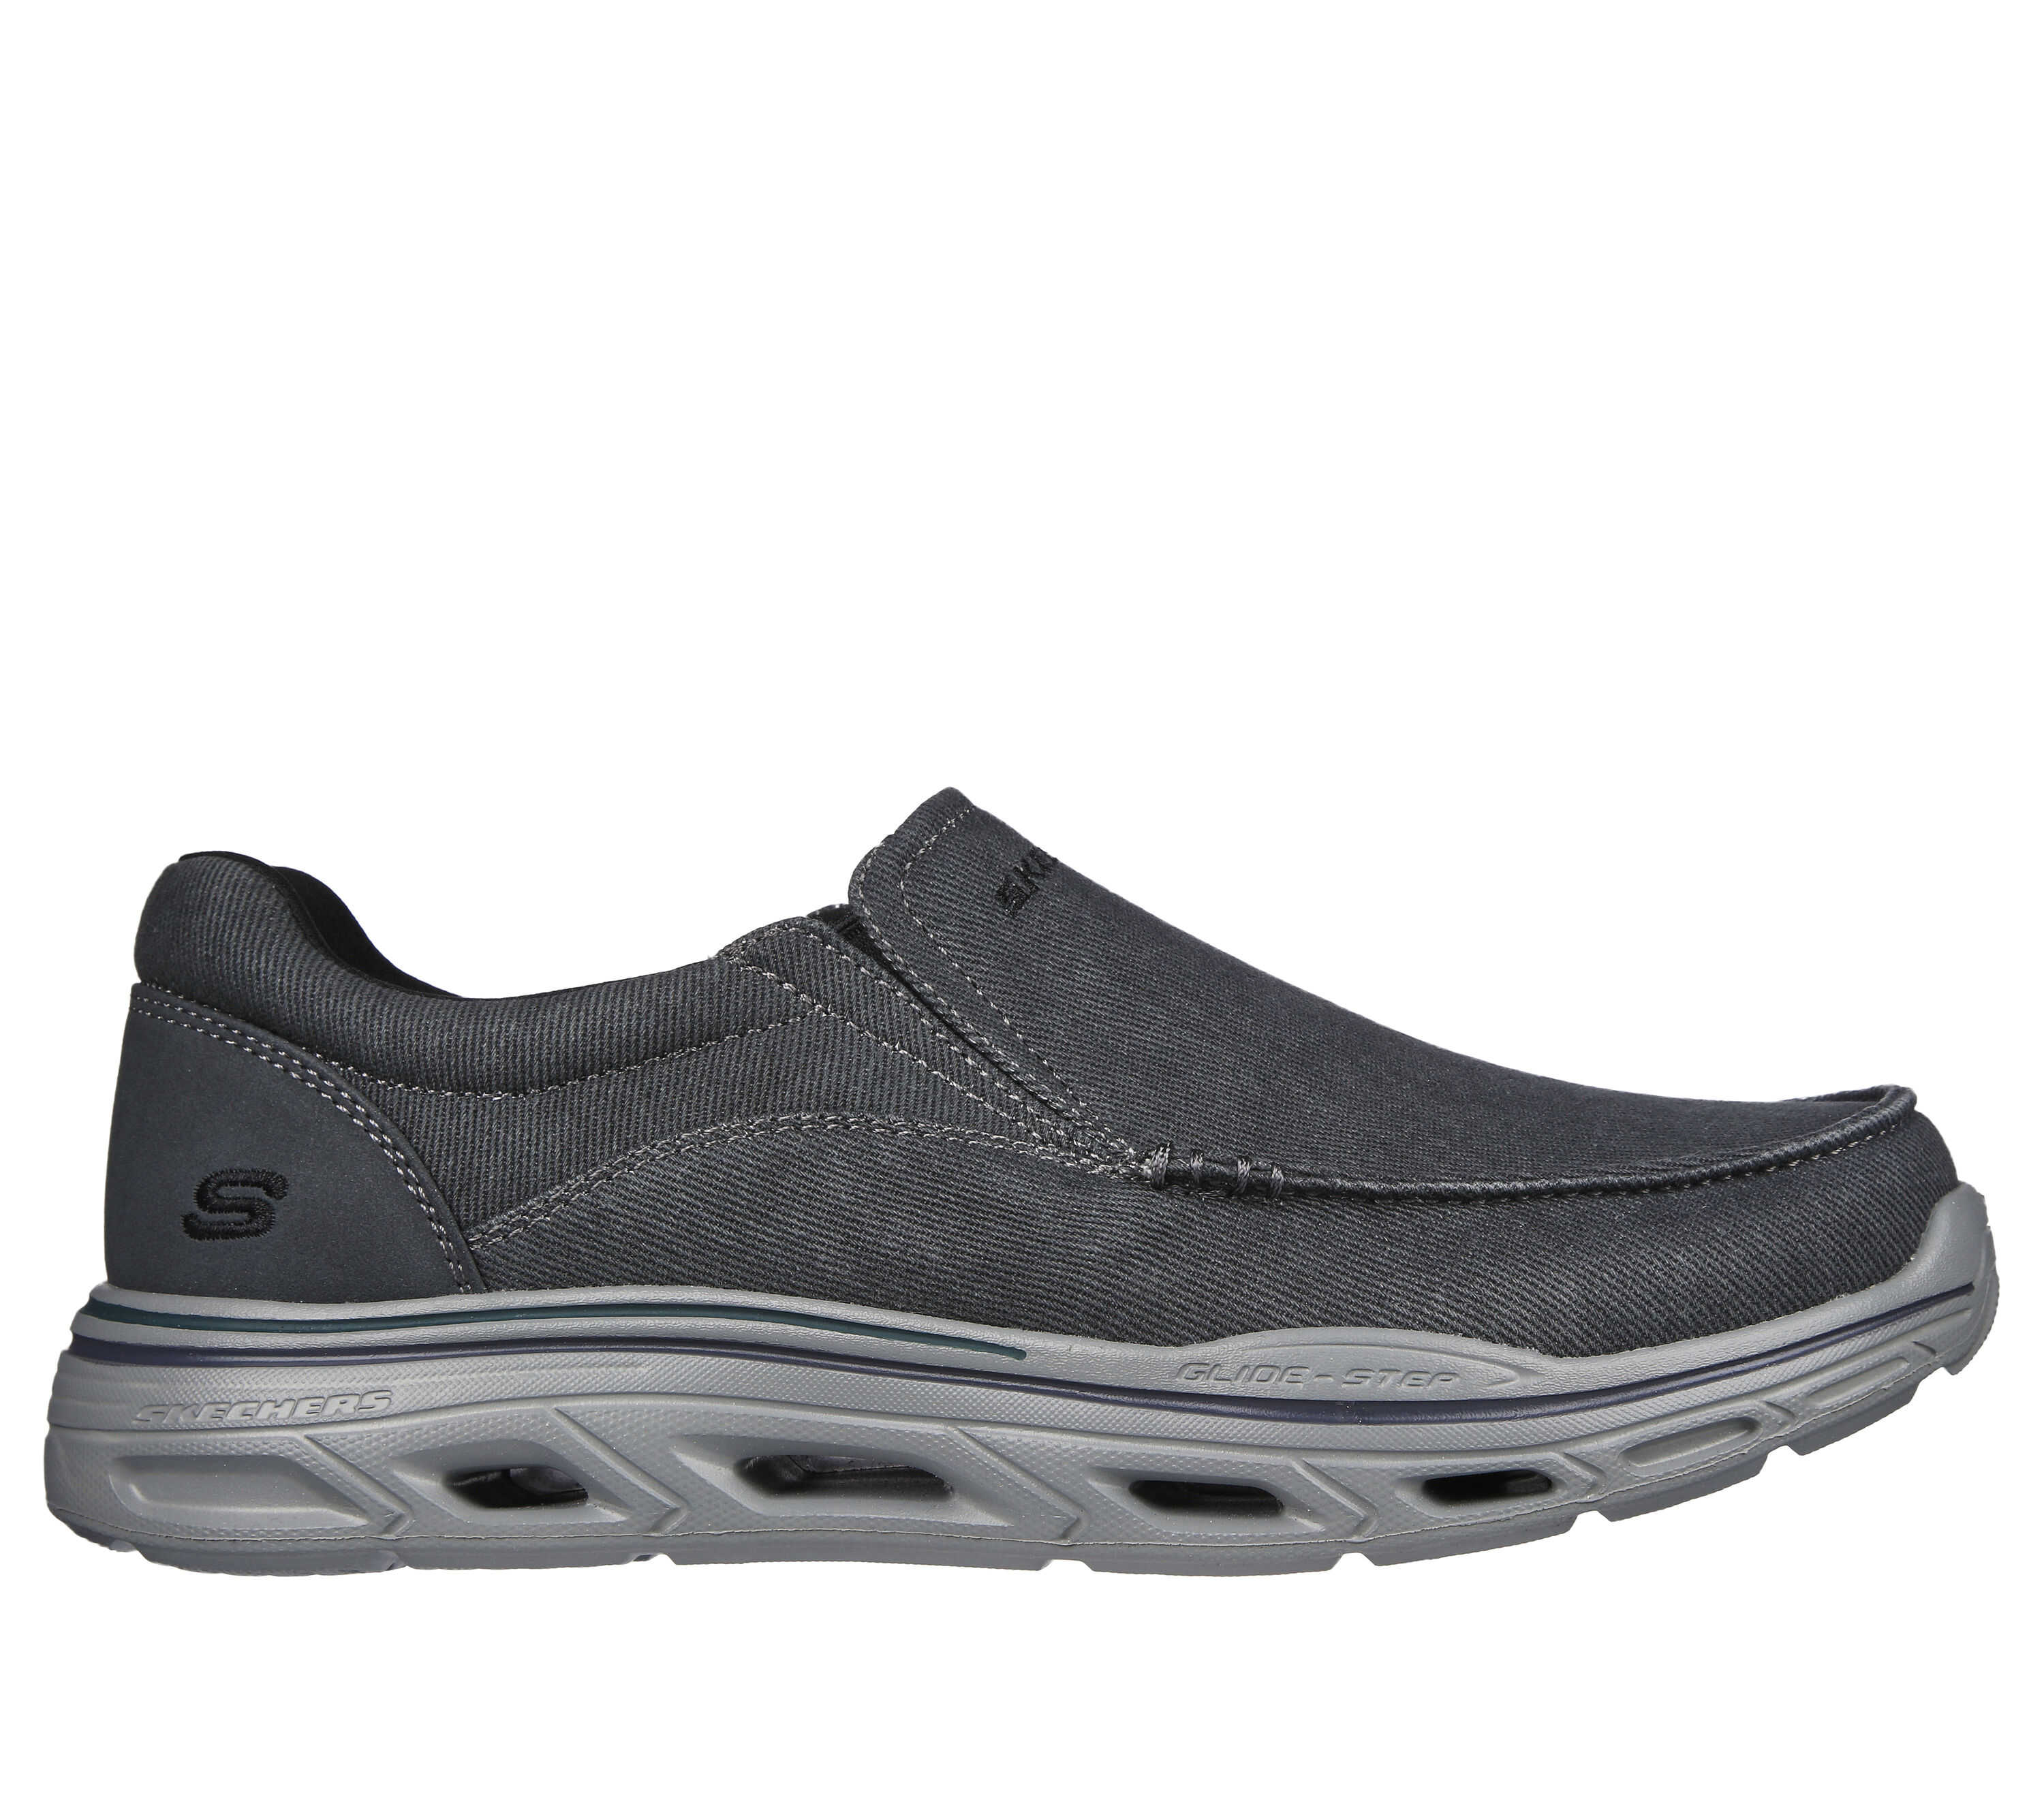 Shop the Relaxed Fit: Glide-Step Expected - Irwin | SKECHERS CA